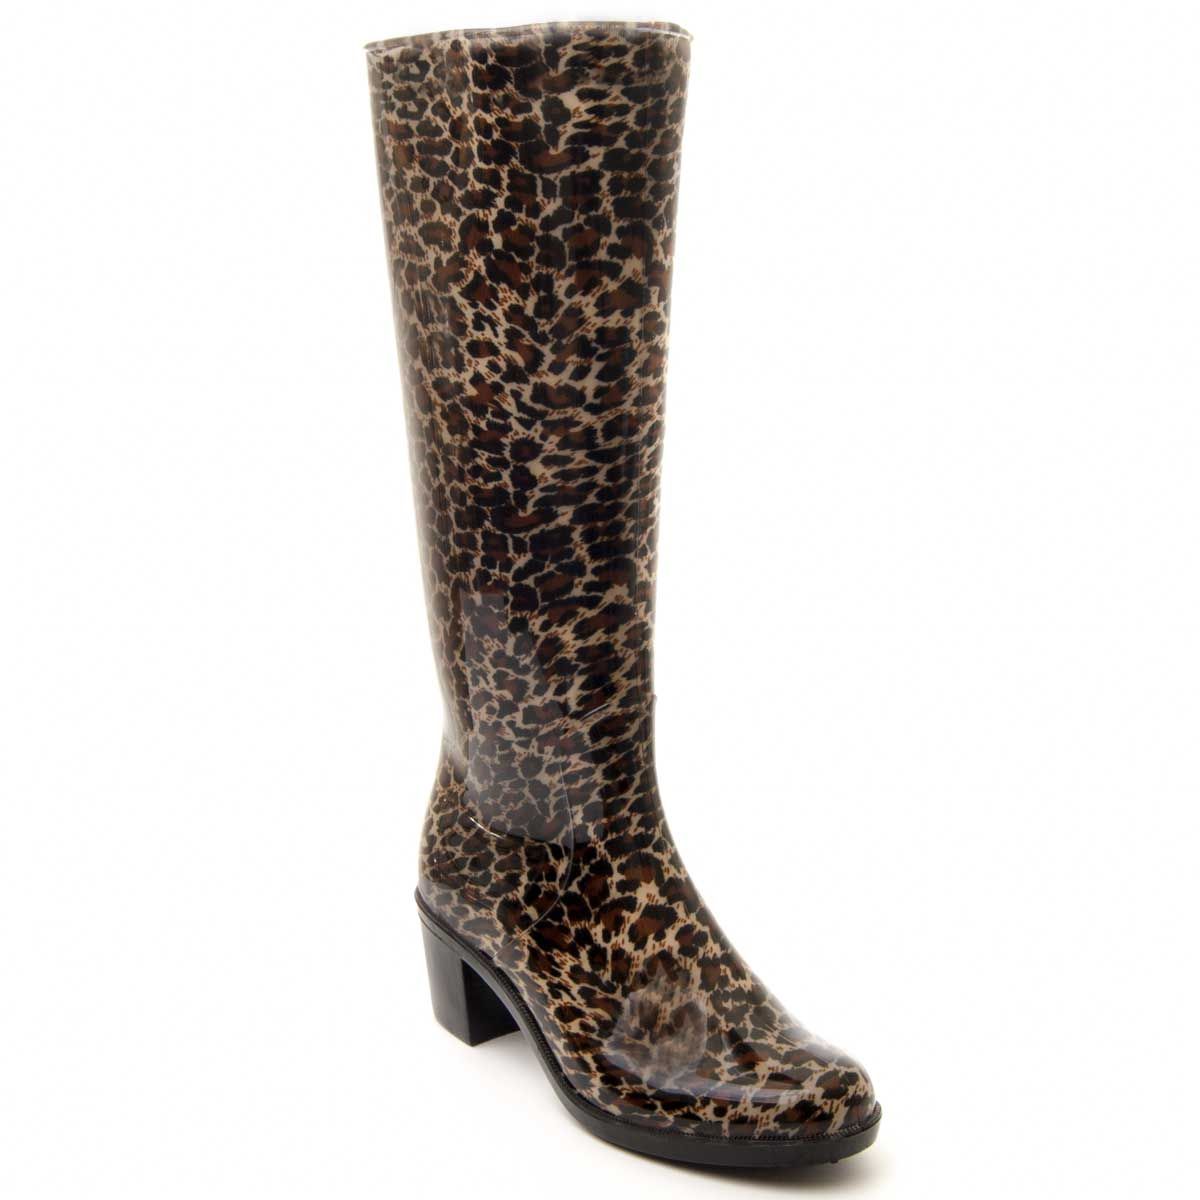 Water boot with heel and high cane with measurements: 37cm * 15cm. Perfect for rainy days as it keeps the feet warm and dry. AnimalPrint Leopard. Both sole and outer lining are one piece so that water does not penetrate. Anti-slip rubber floor. Previous and later reinforcement for durability. Removable padded template.